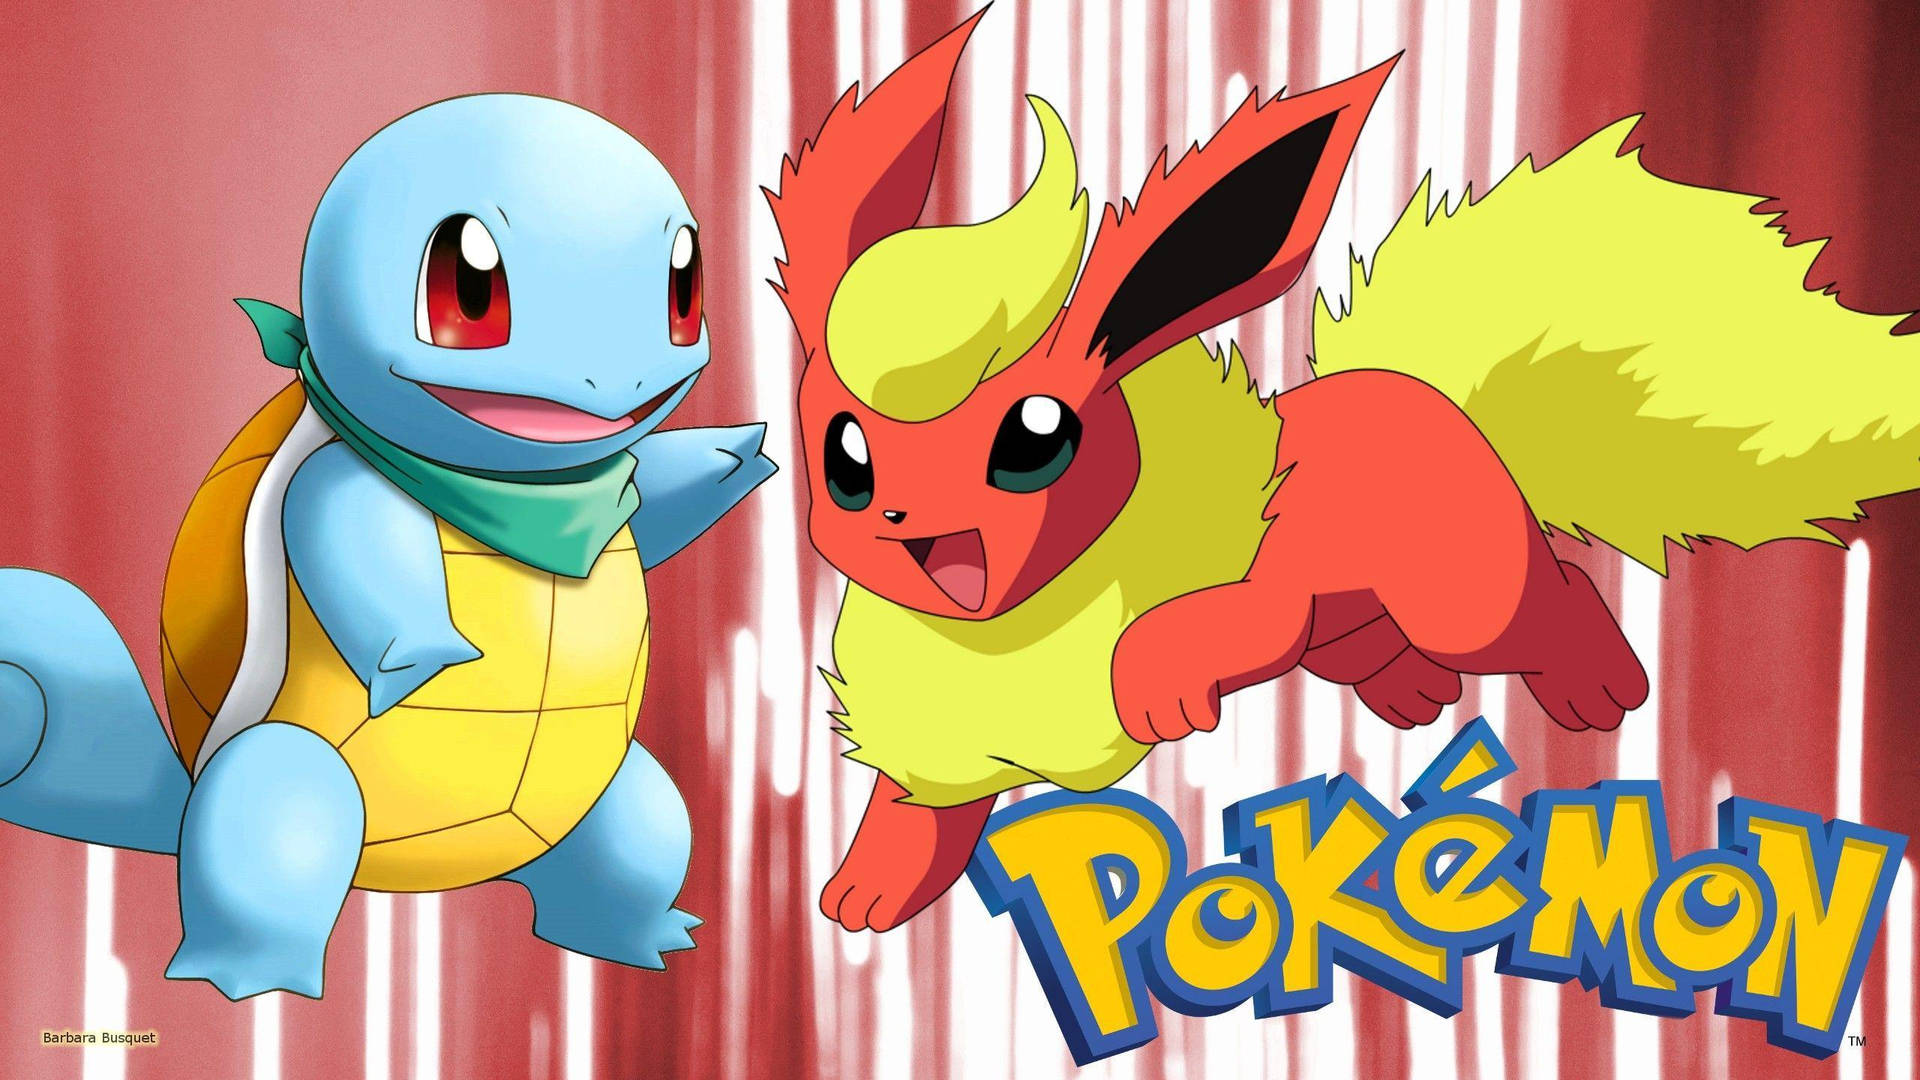 Flareon And Squirtle From Pokemon Wallpaper